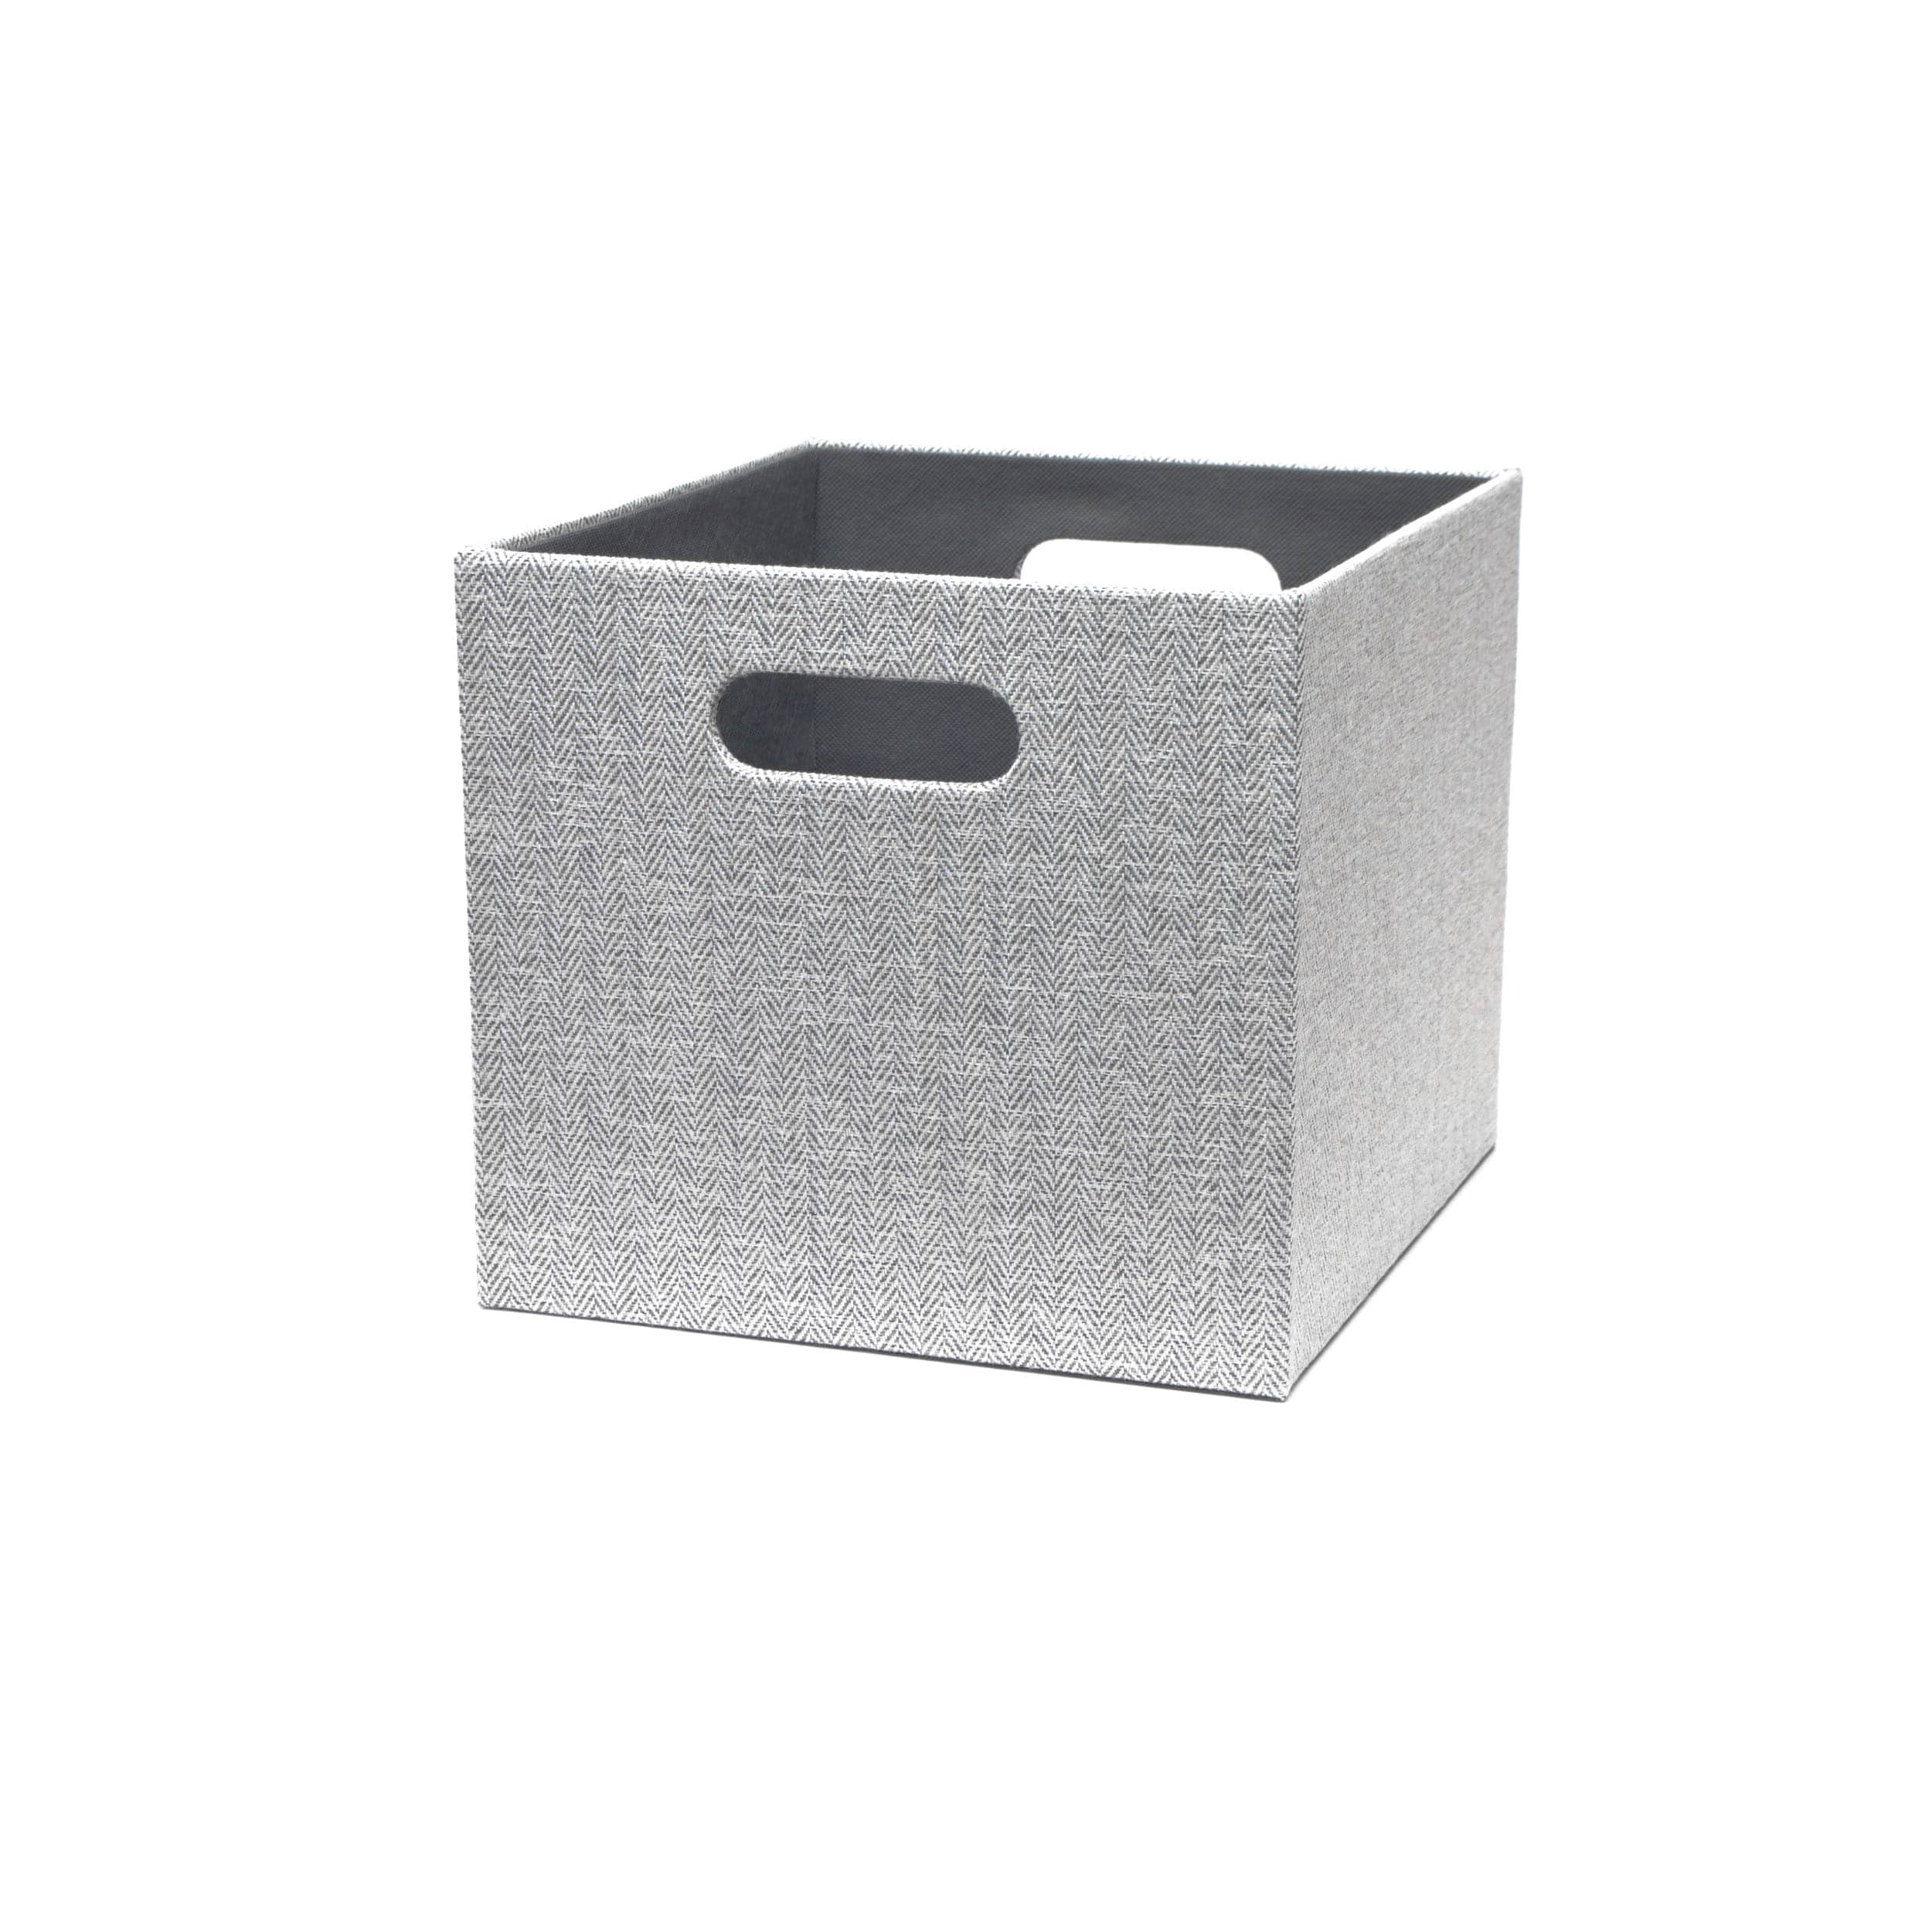 Cube Cube Storage Organizers at Lowes.com